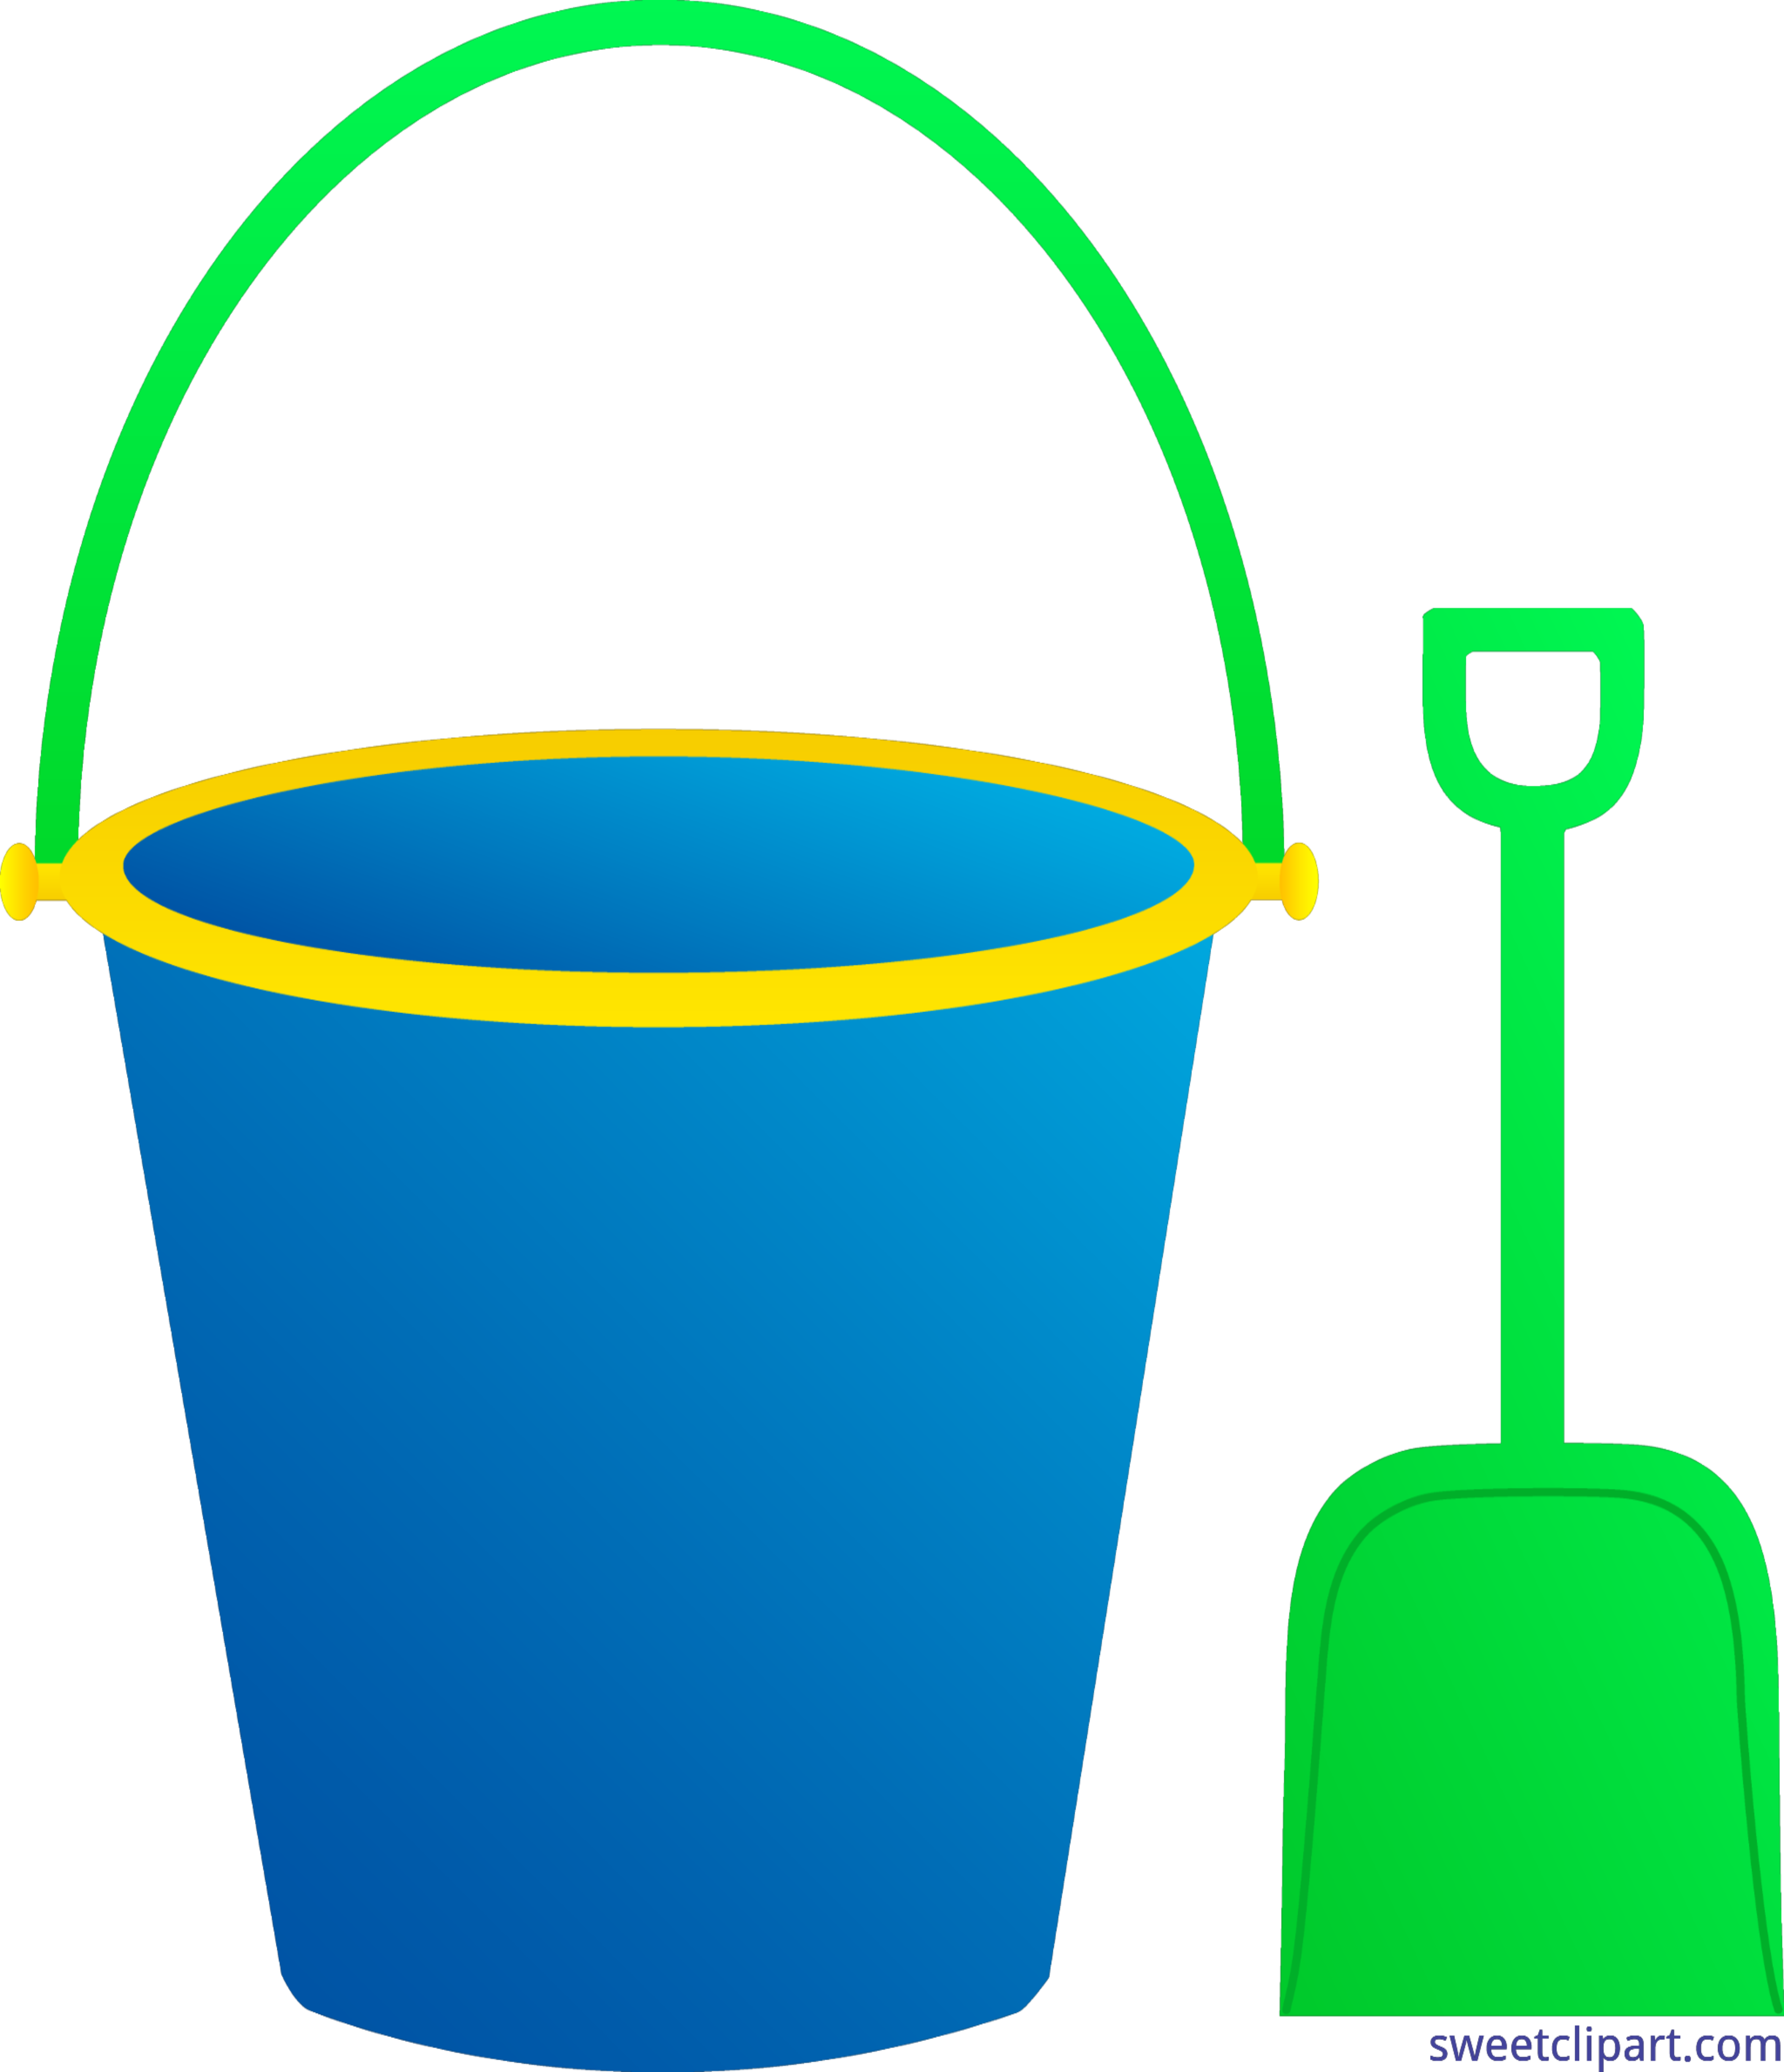 Green clipart pail. And shovel real vector